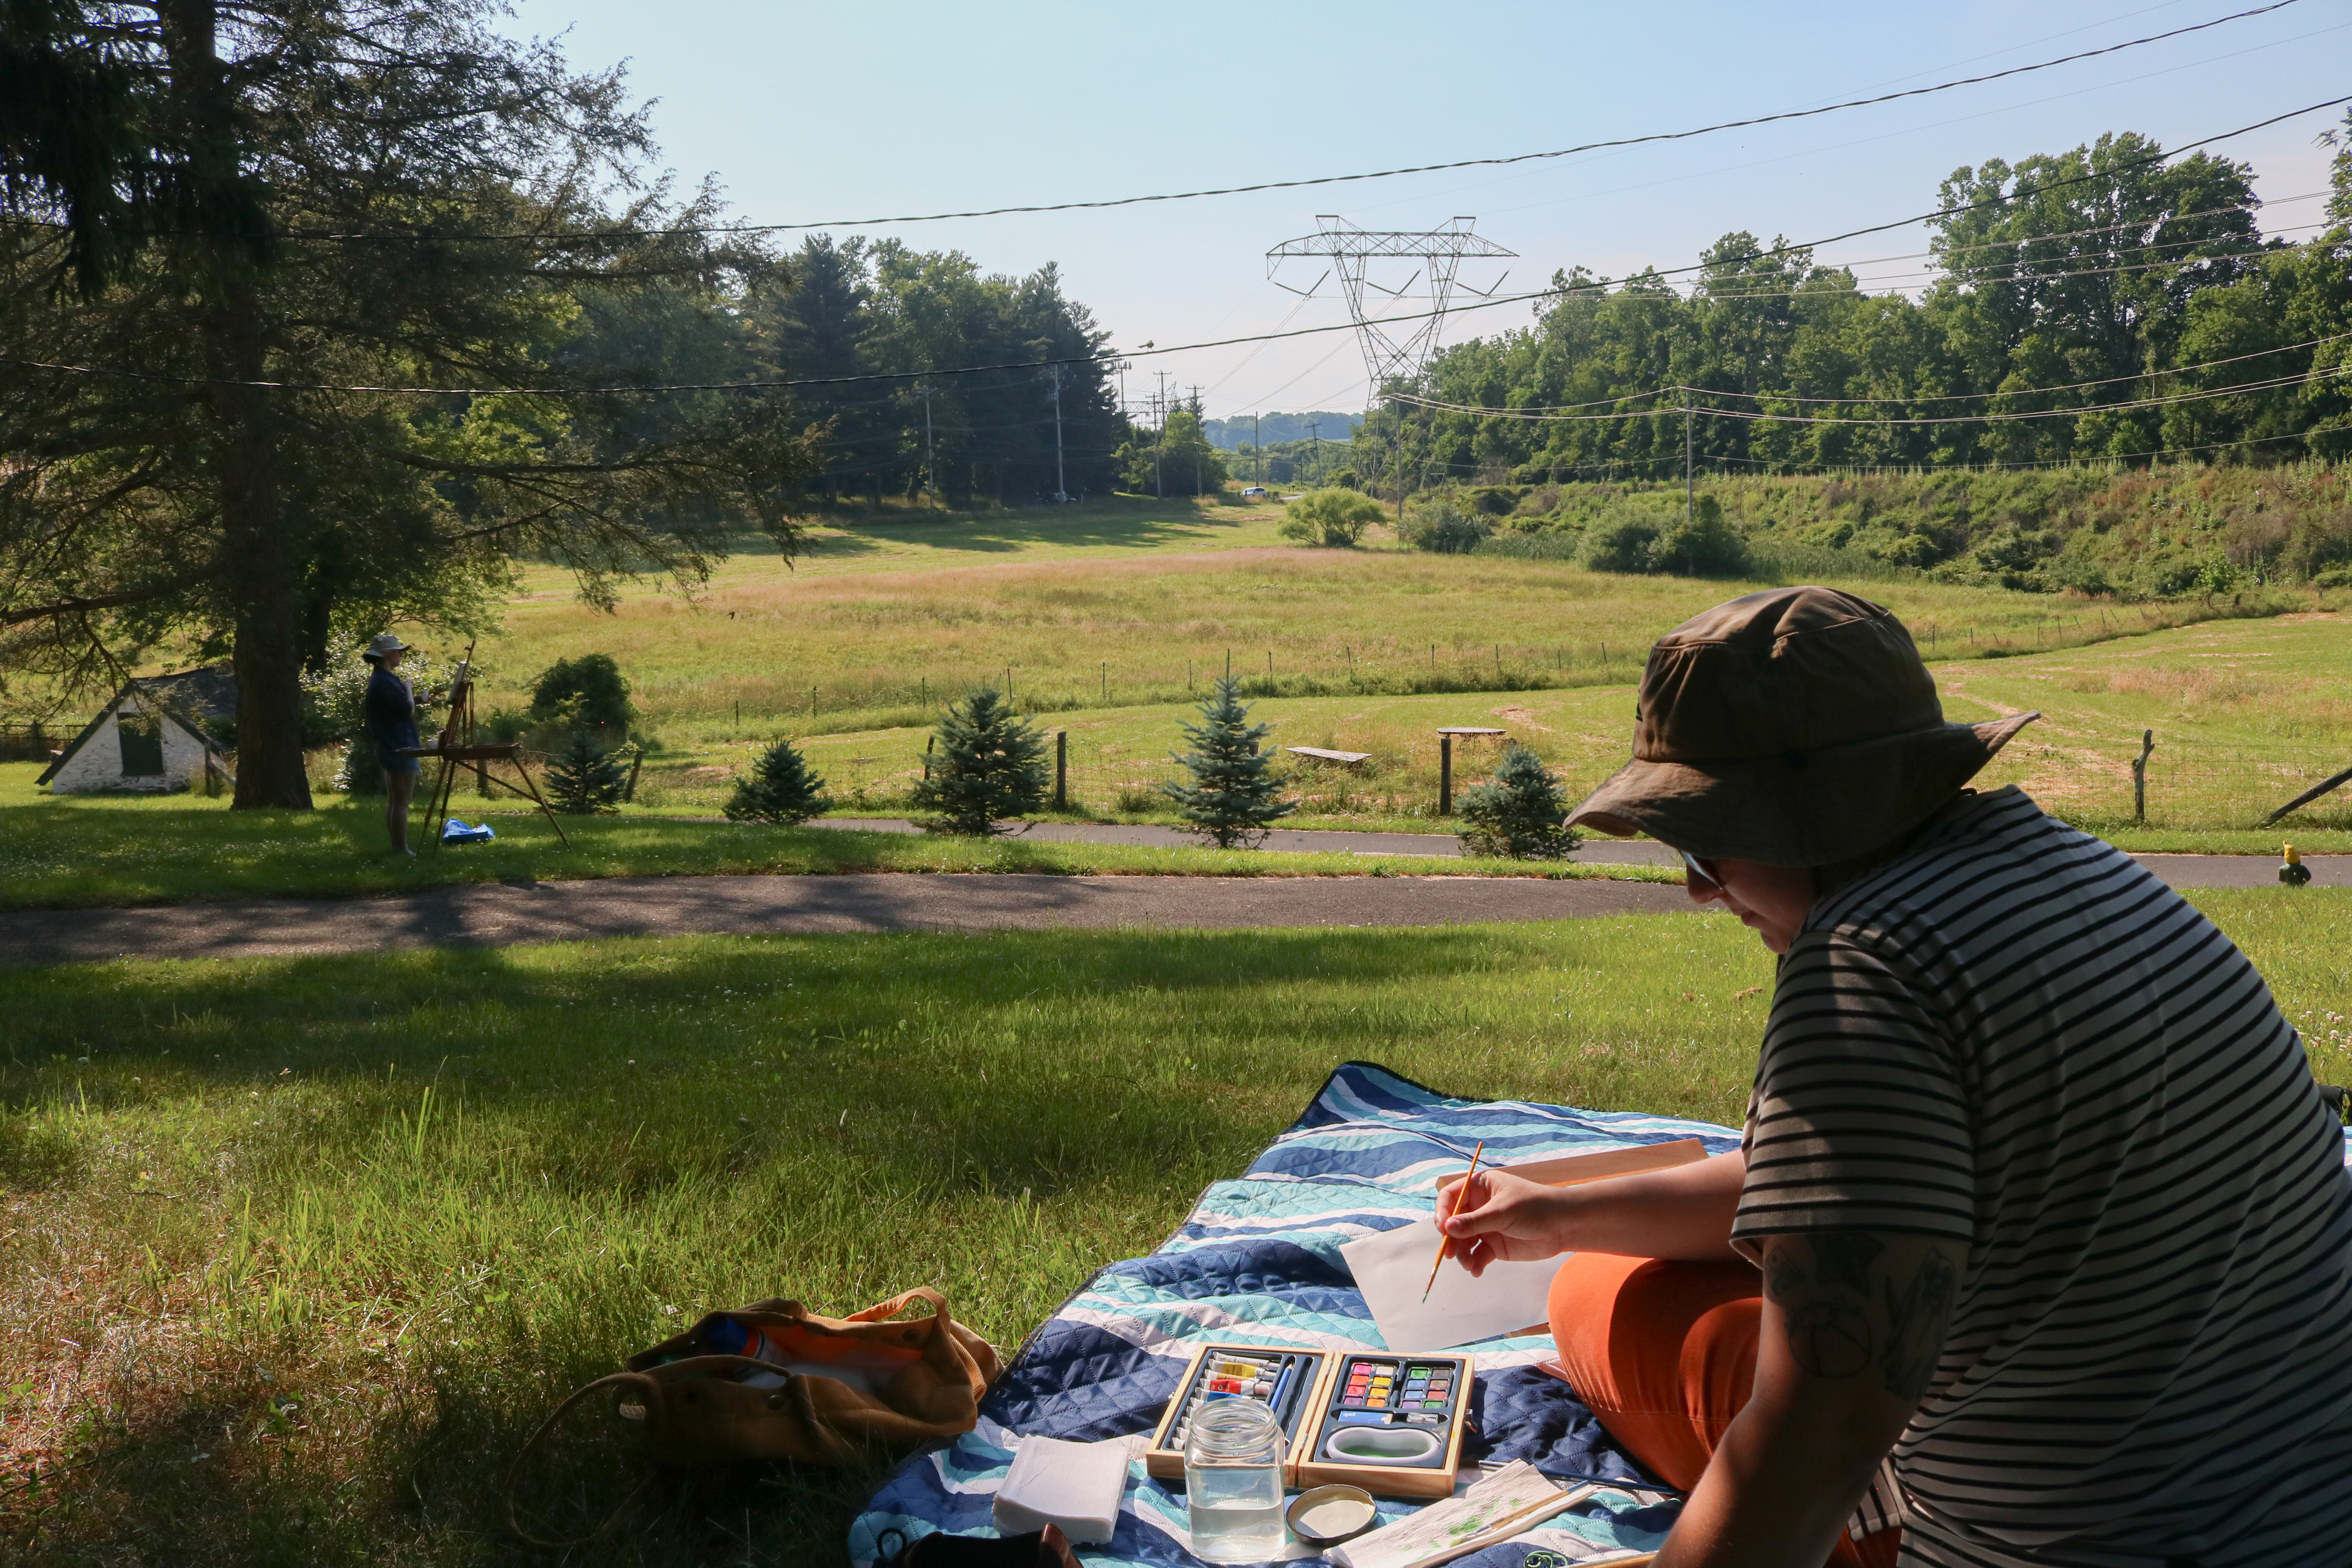 A person sits on a blanket painting in an open area overlooking a small valley.